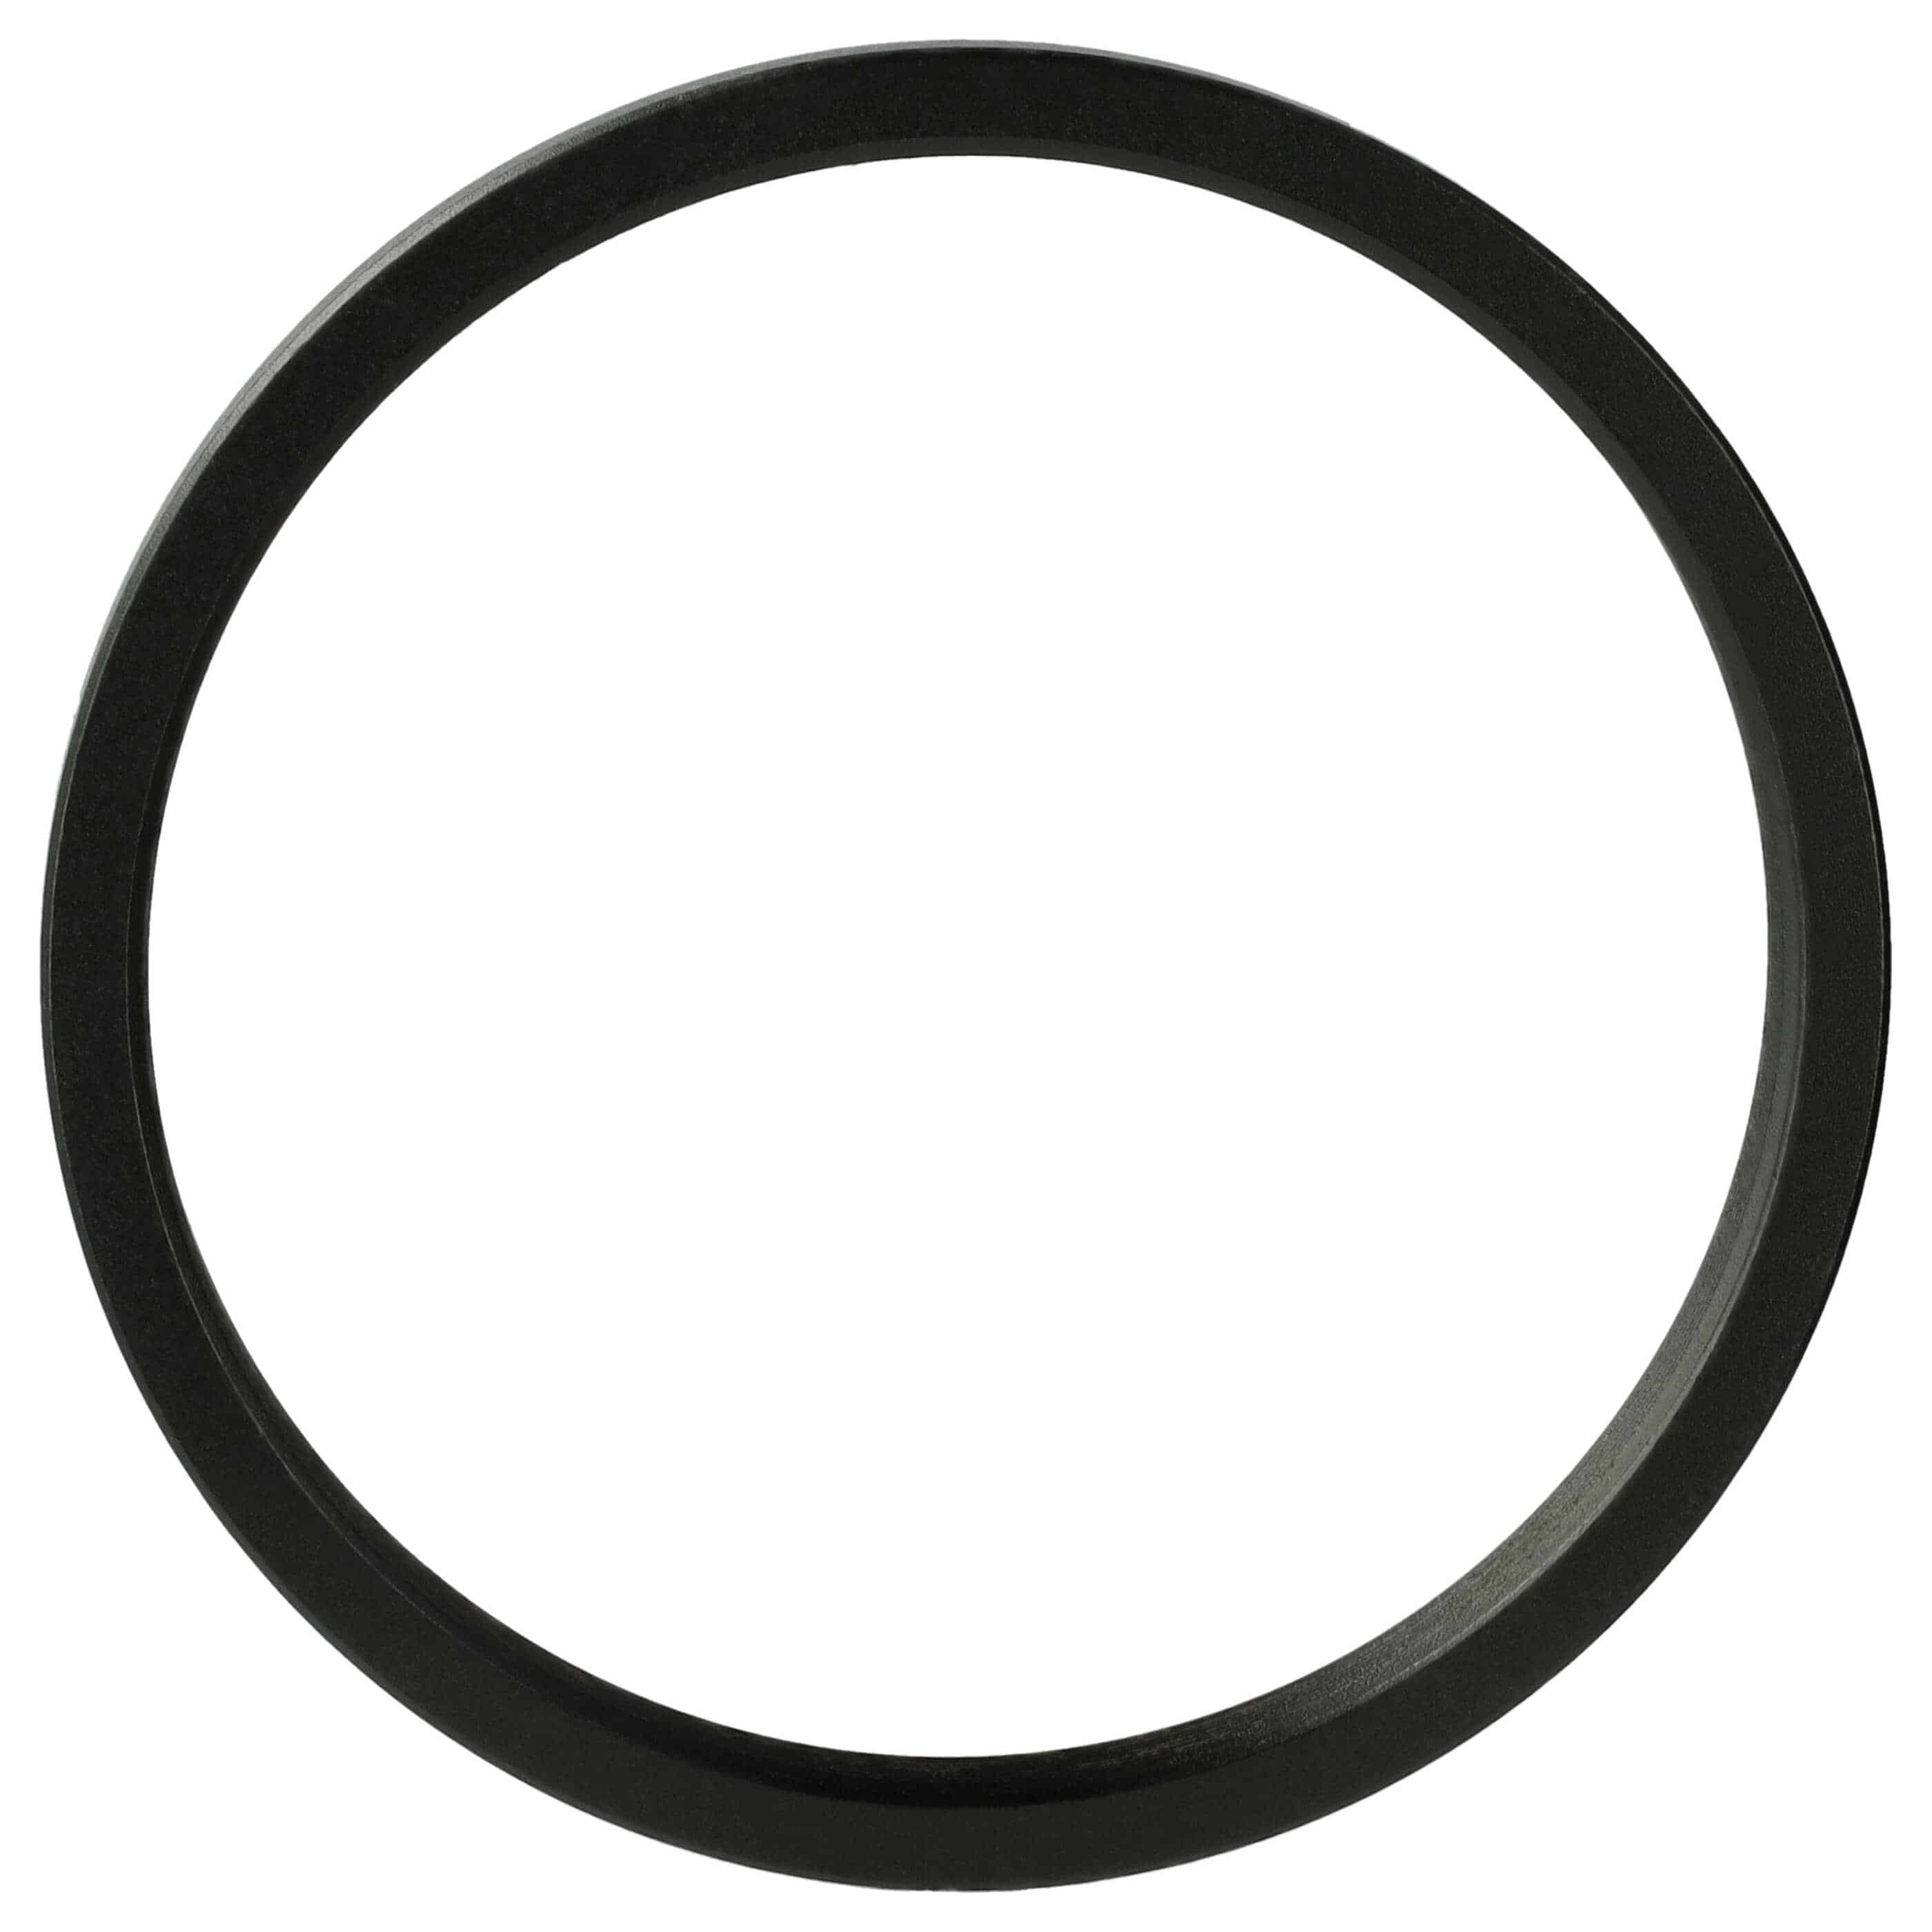 Step-Down Ring Adapter from 49 mm to 46 mm suitable for Camera Lens - Filter Adapter, metal